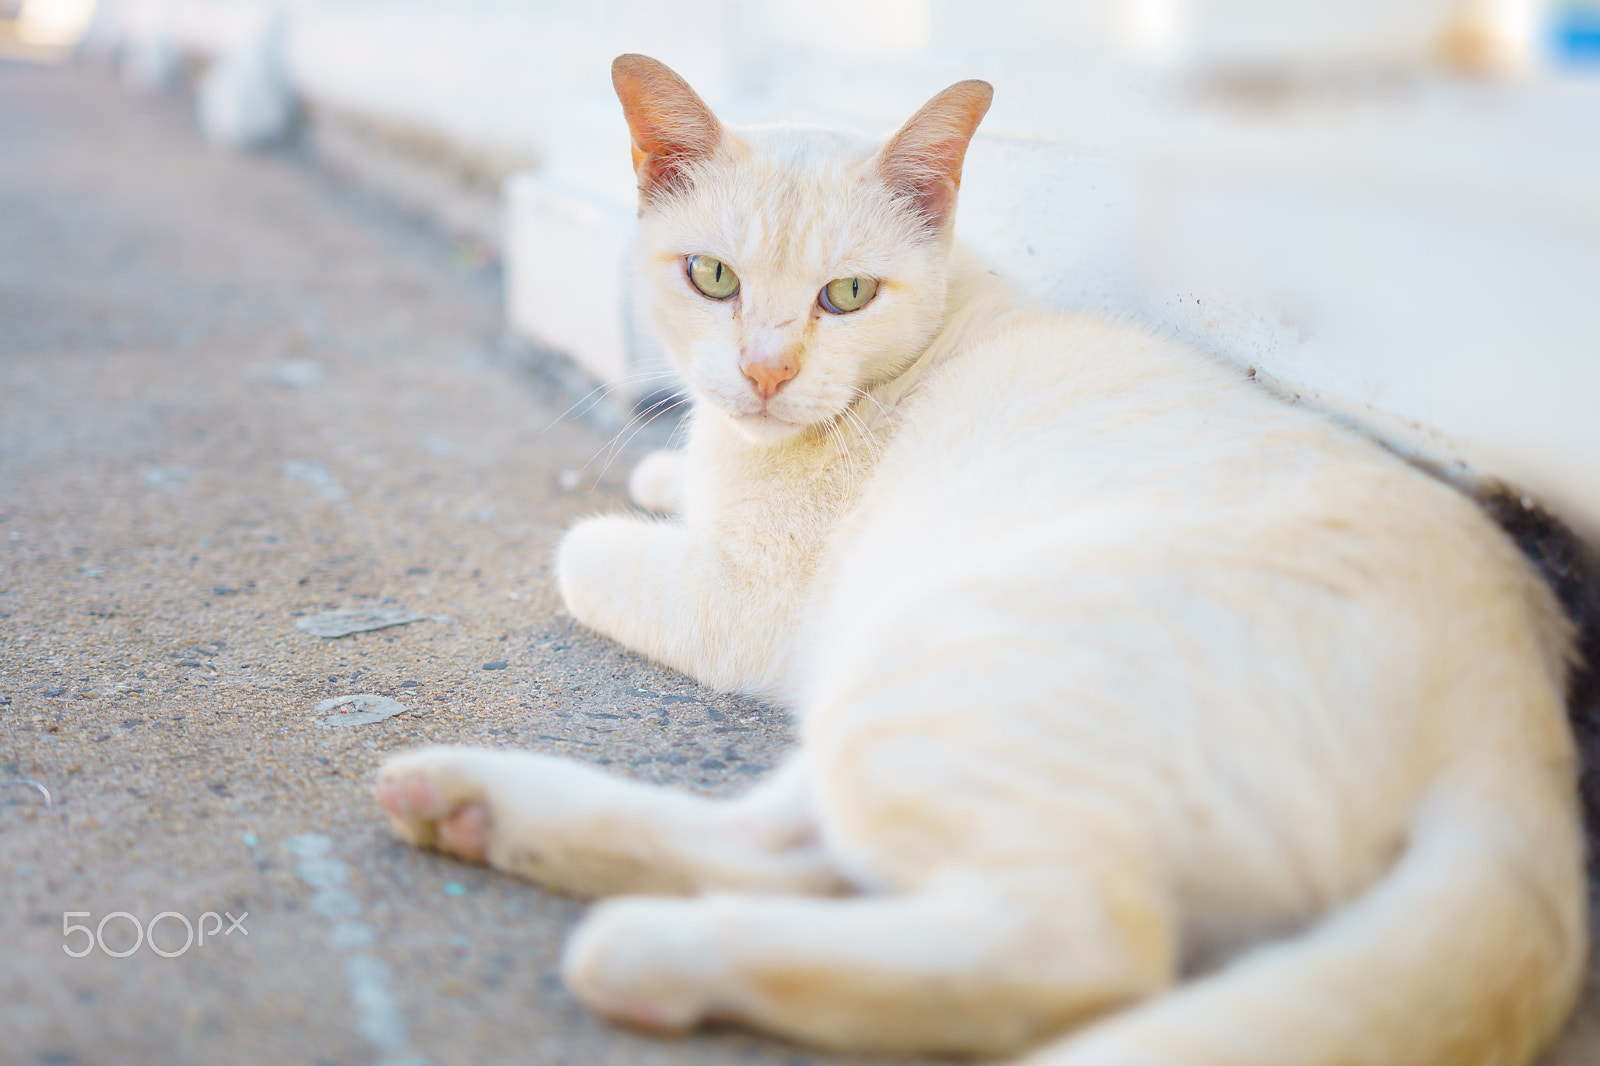 Sony a6000 sample photo. Cute adorable white cat sitting on a street. photography